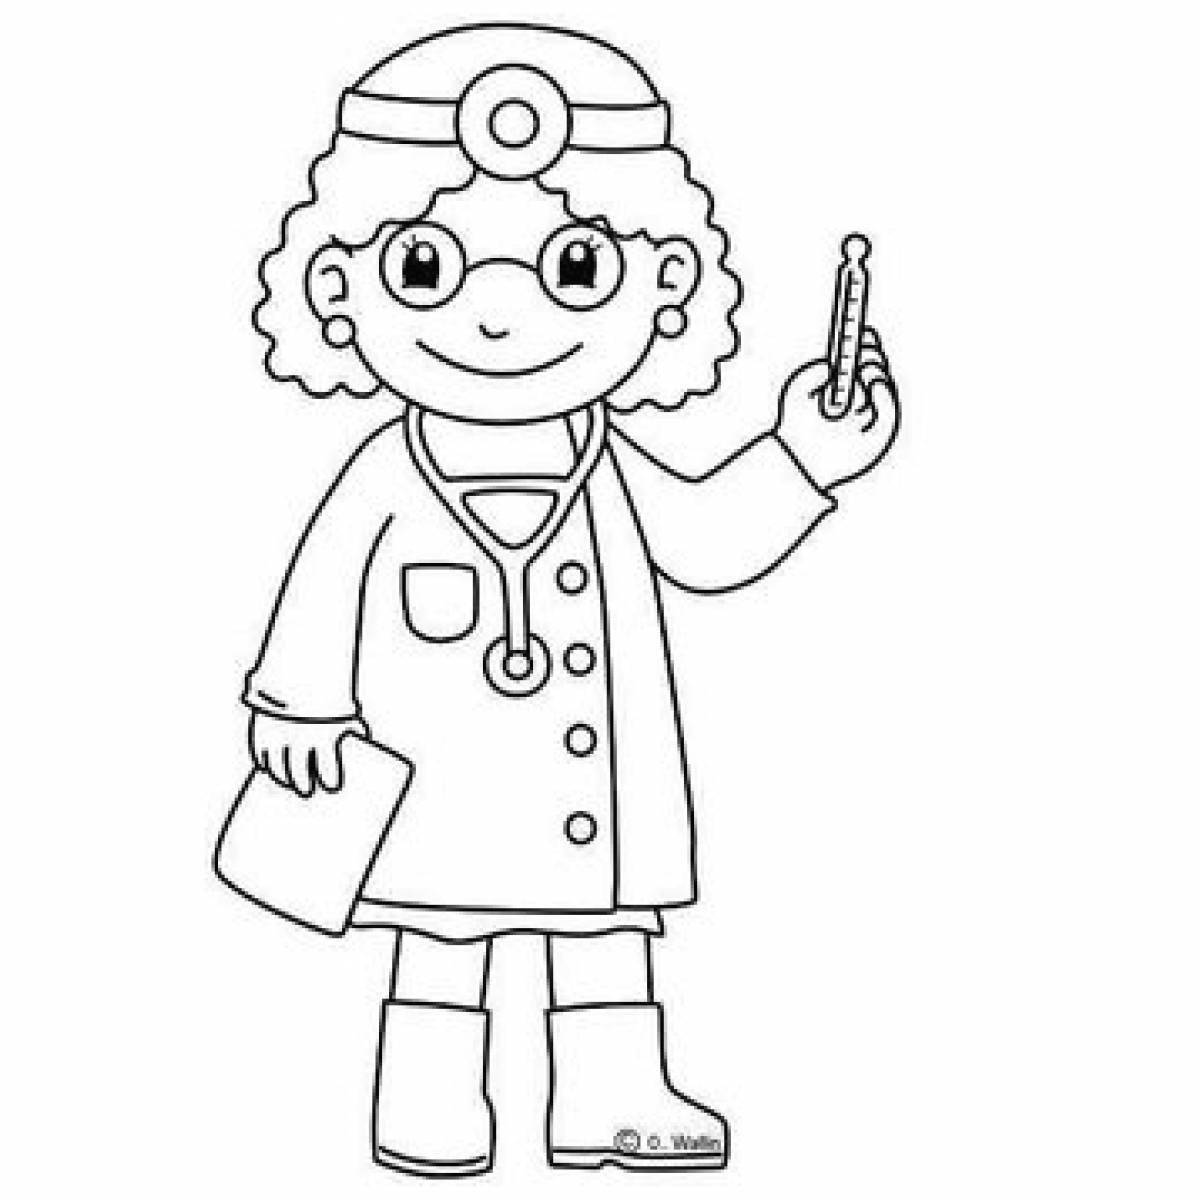 Colored doctor figurine coloring book